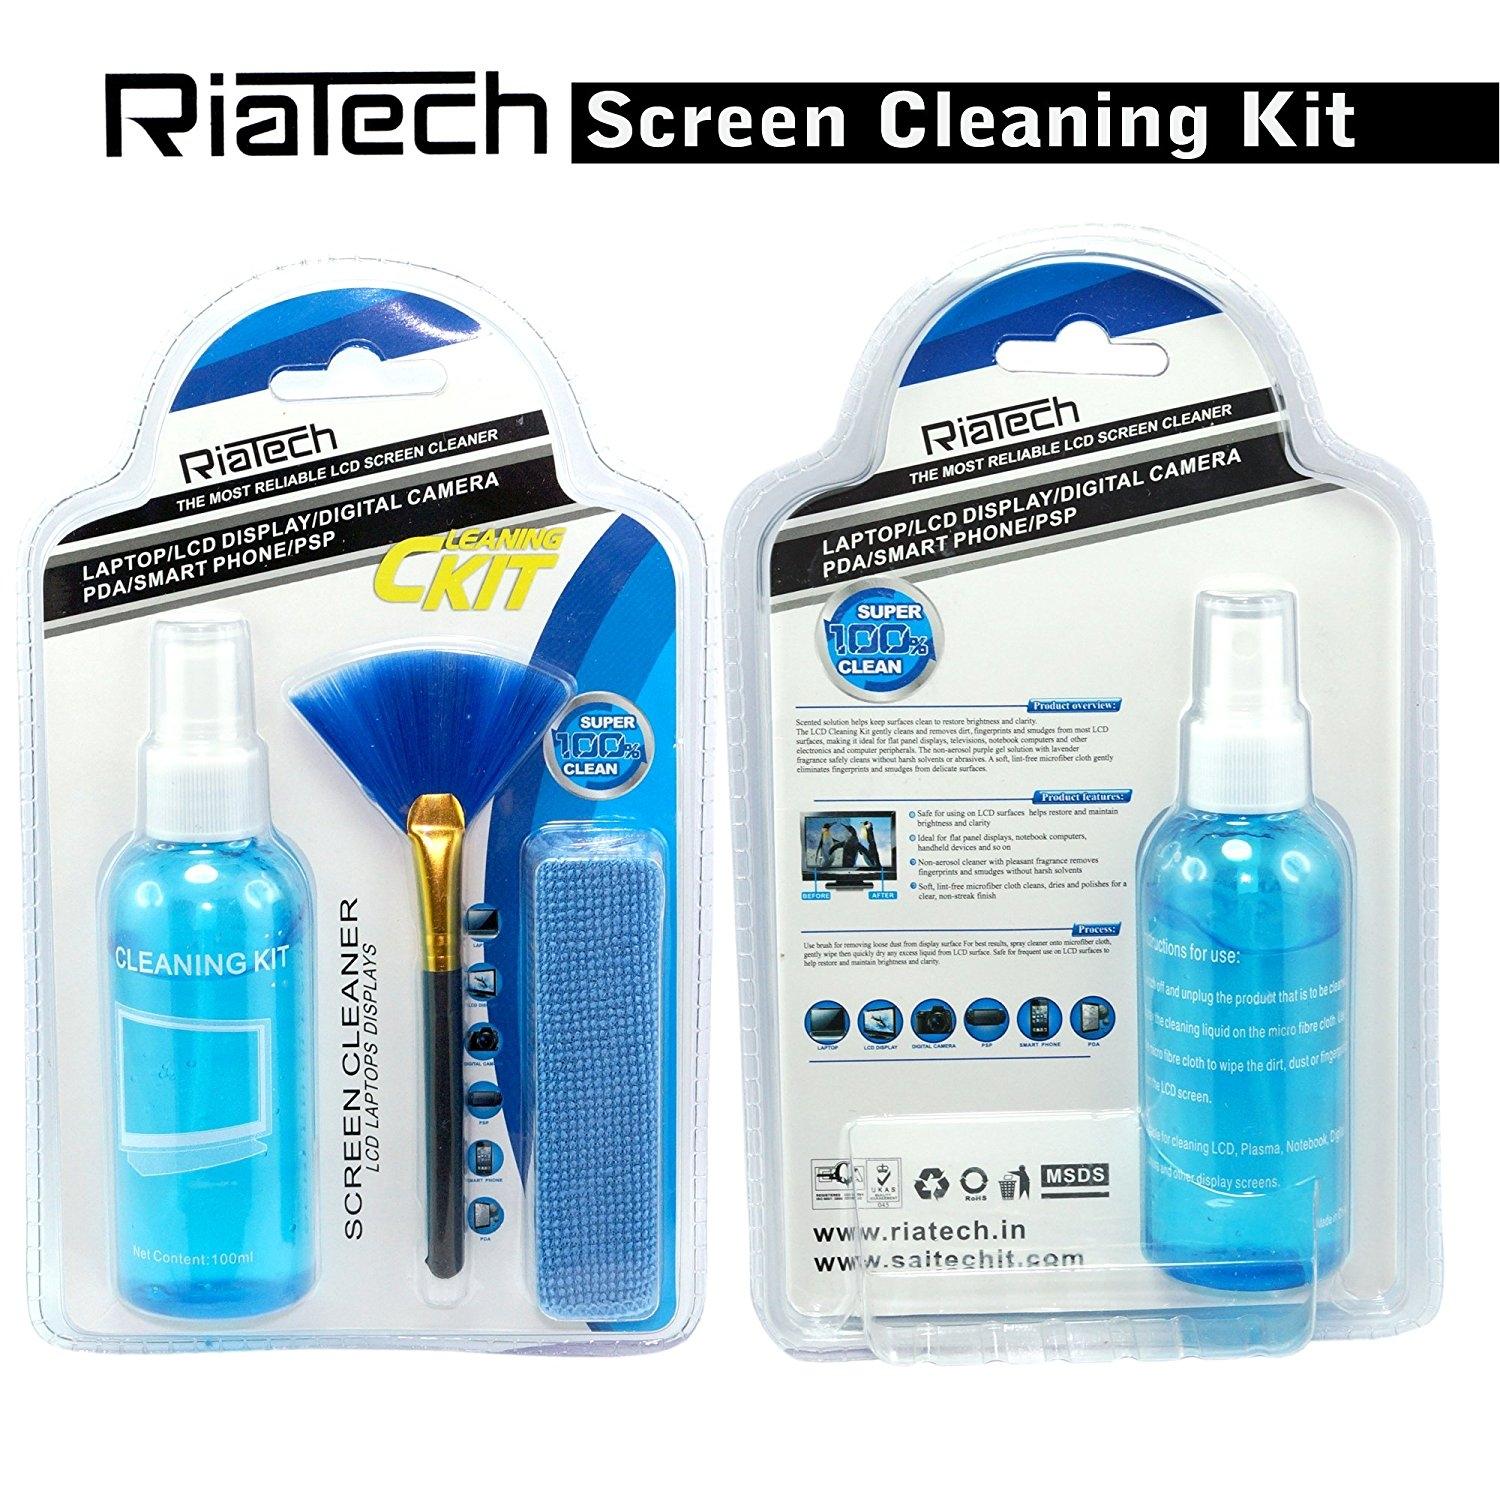 3 in 1 Laptop Cleaning Kit Monitor TV PC LED LCD Screen Cleaner Cloth Brush